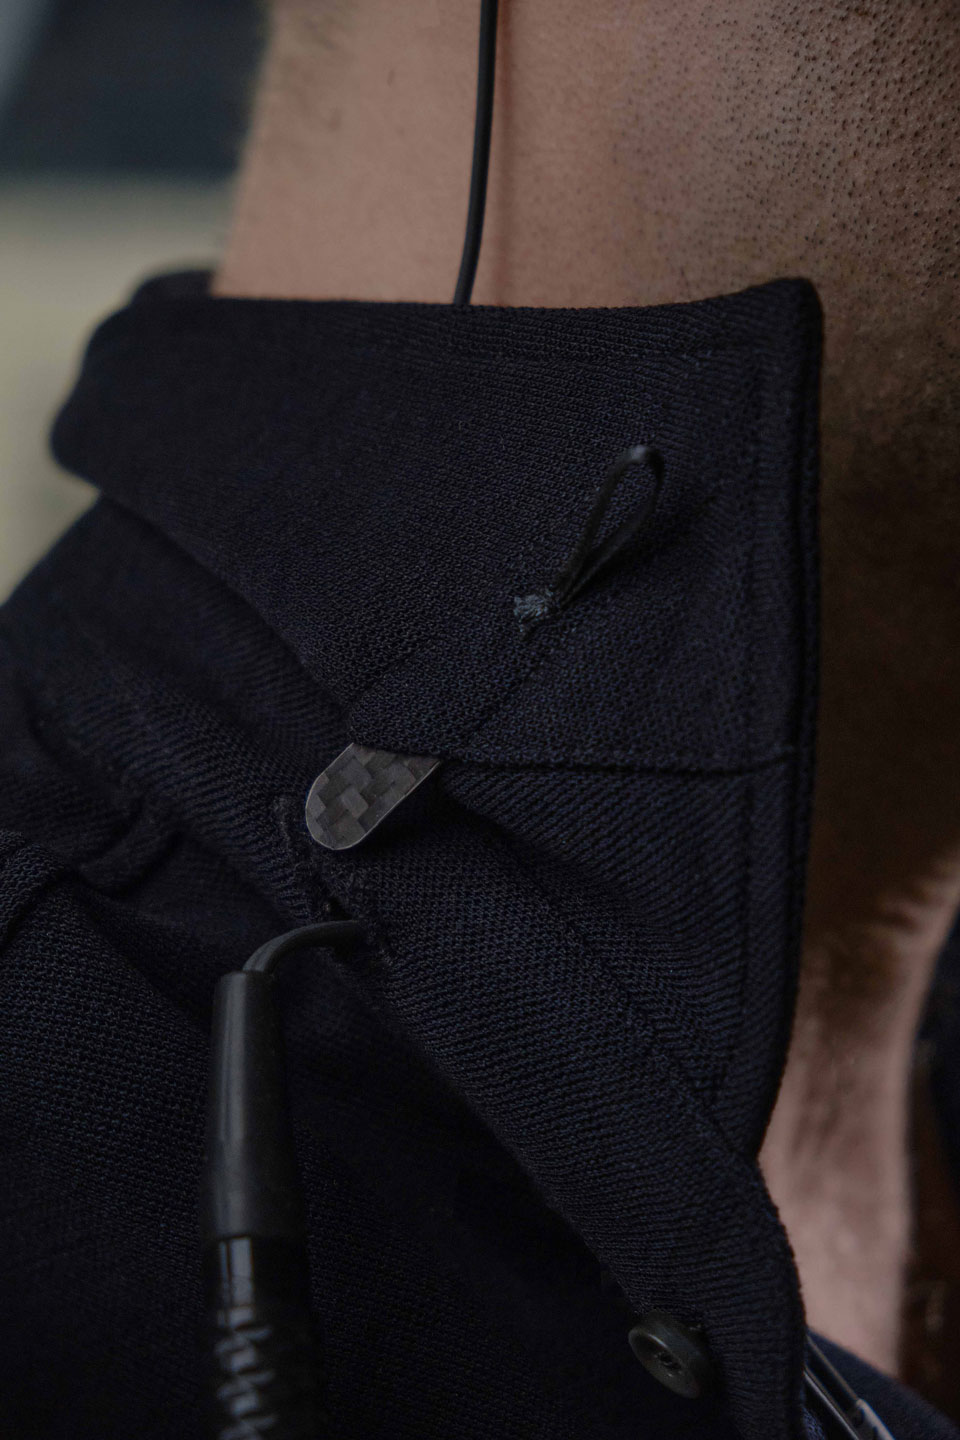 Close up of pique merino polo shirt collar with carbon fibre insert from Grayman and Company